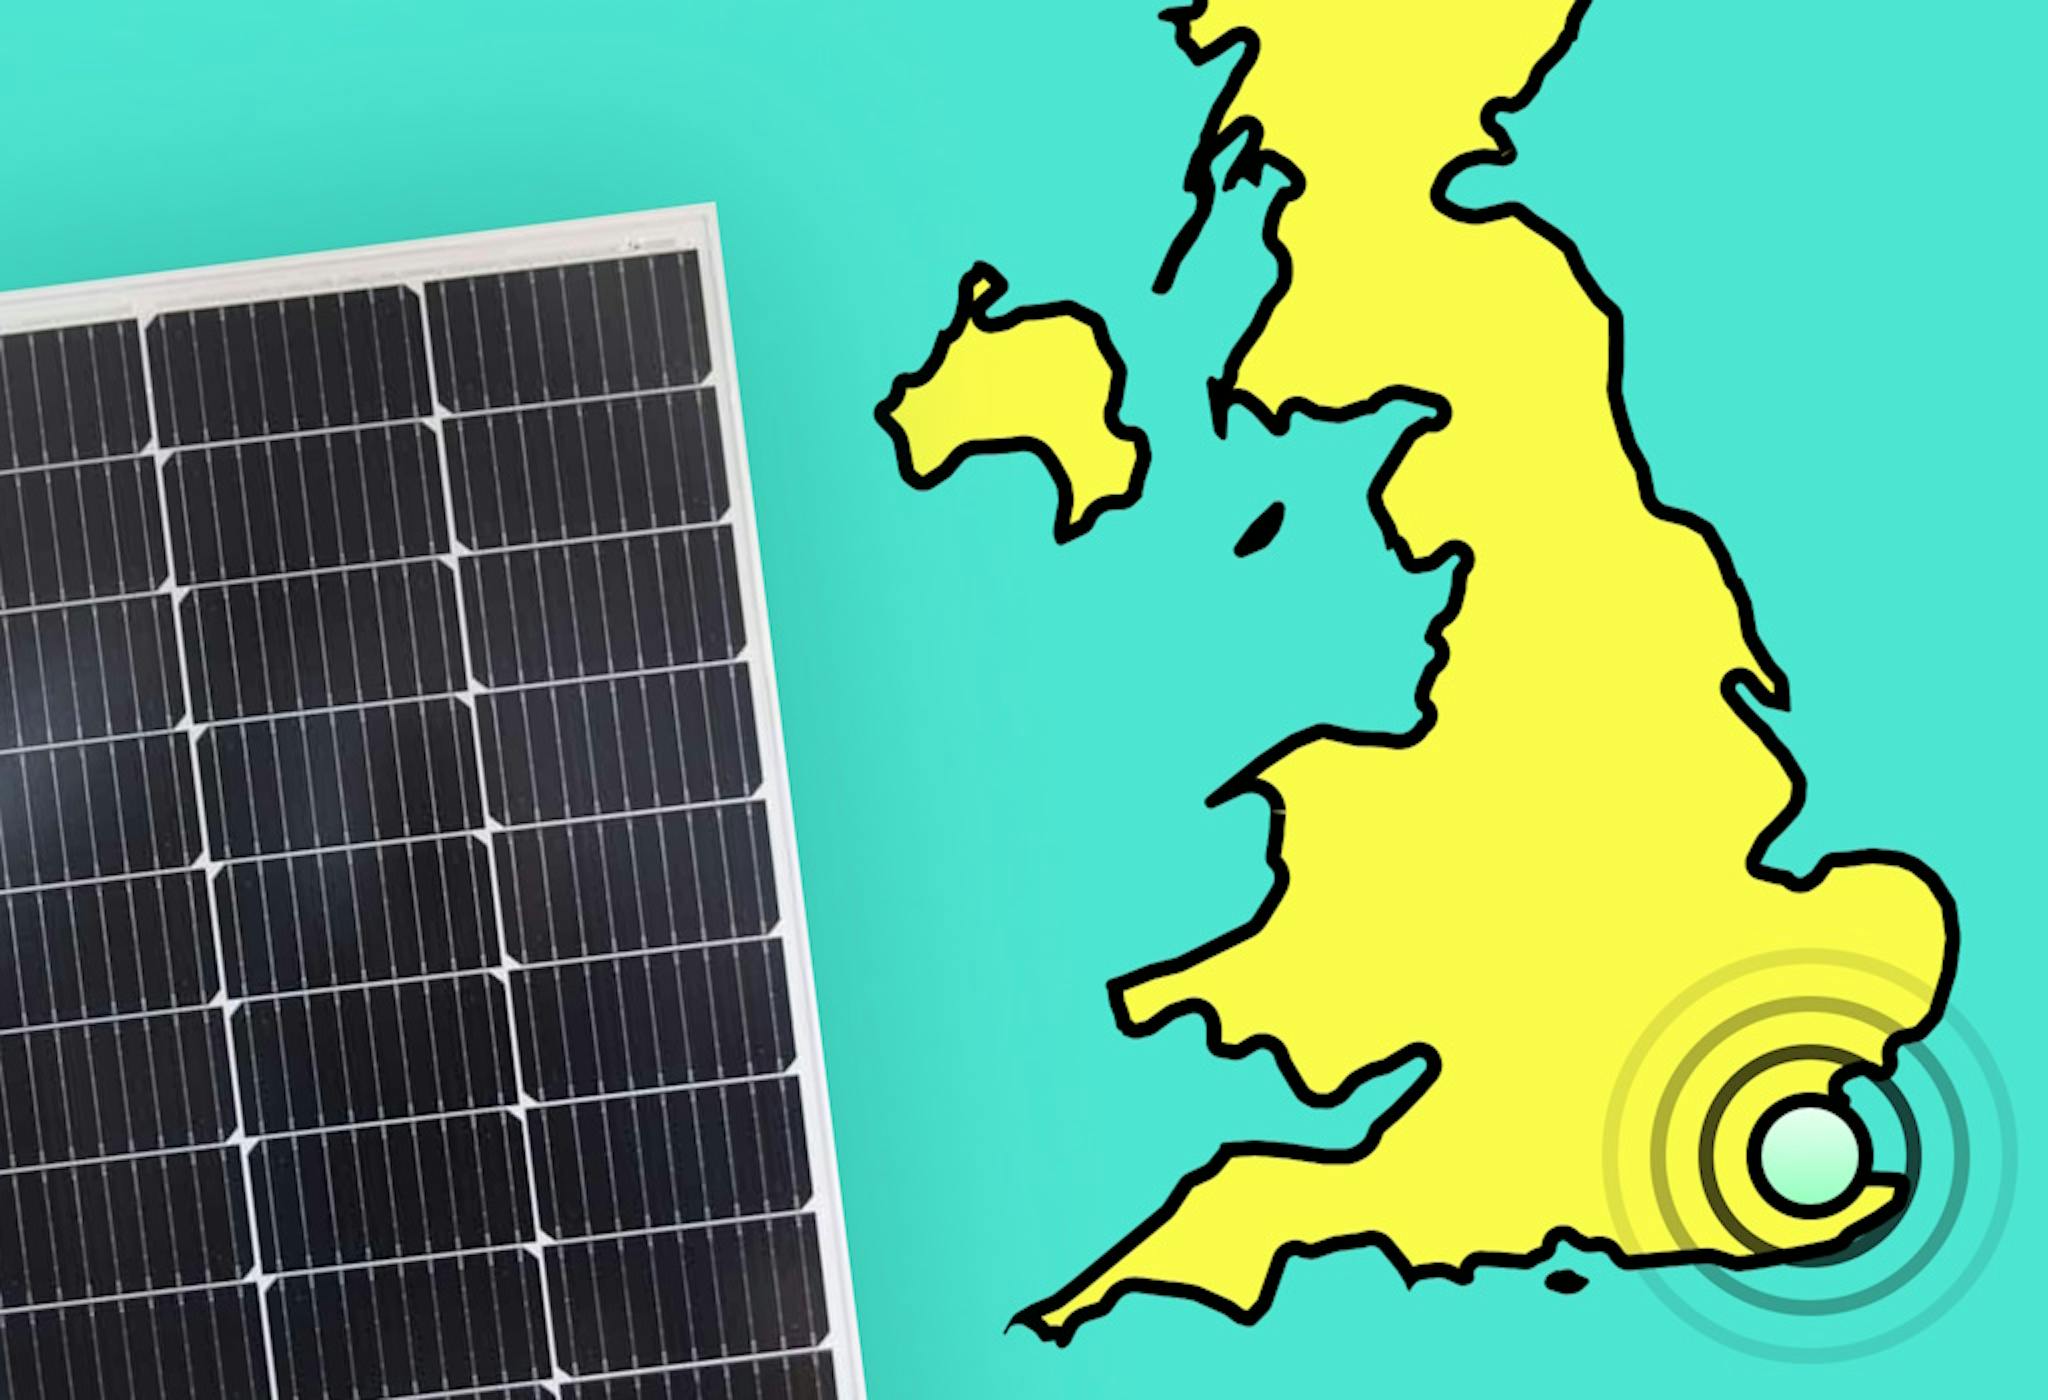 A graphic that has a cut-off map of the United Kingdom on the right with concentric circles emanating from Kent, and a photo of a black solar panel on the left. The UK is yellow and outlined in black, and the background is aquamarine